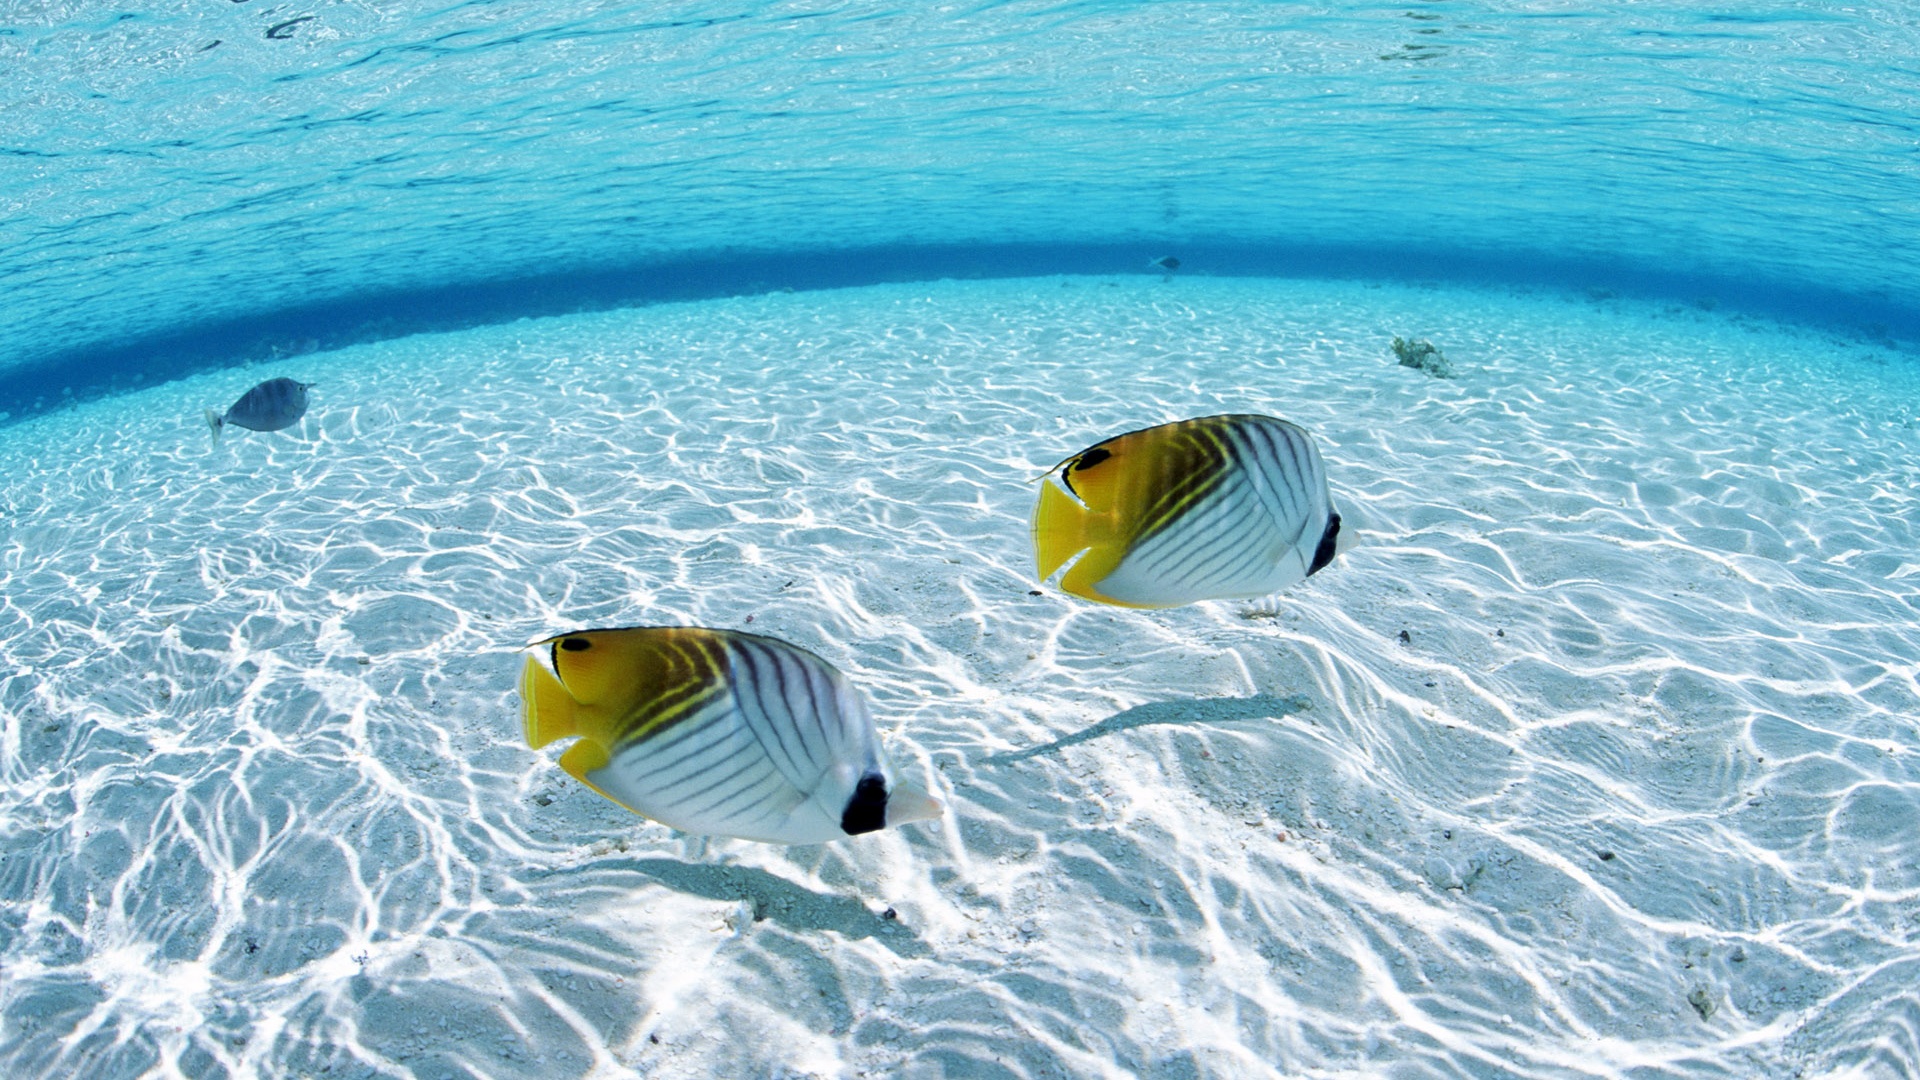 Desktop Tropical Fish In High Quality Wallpaper Background